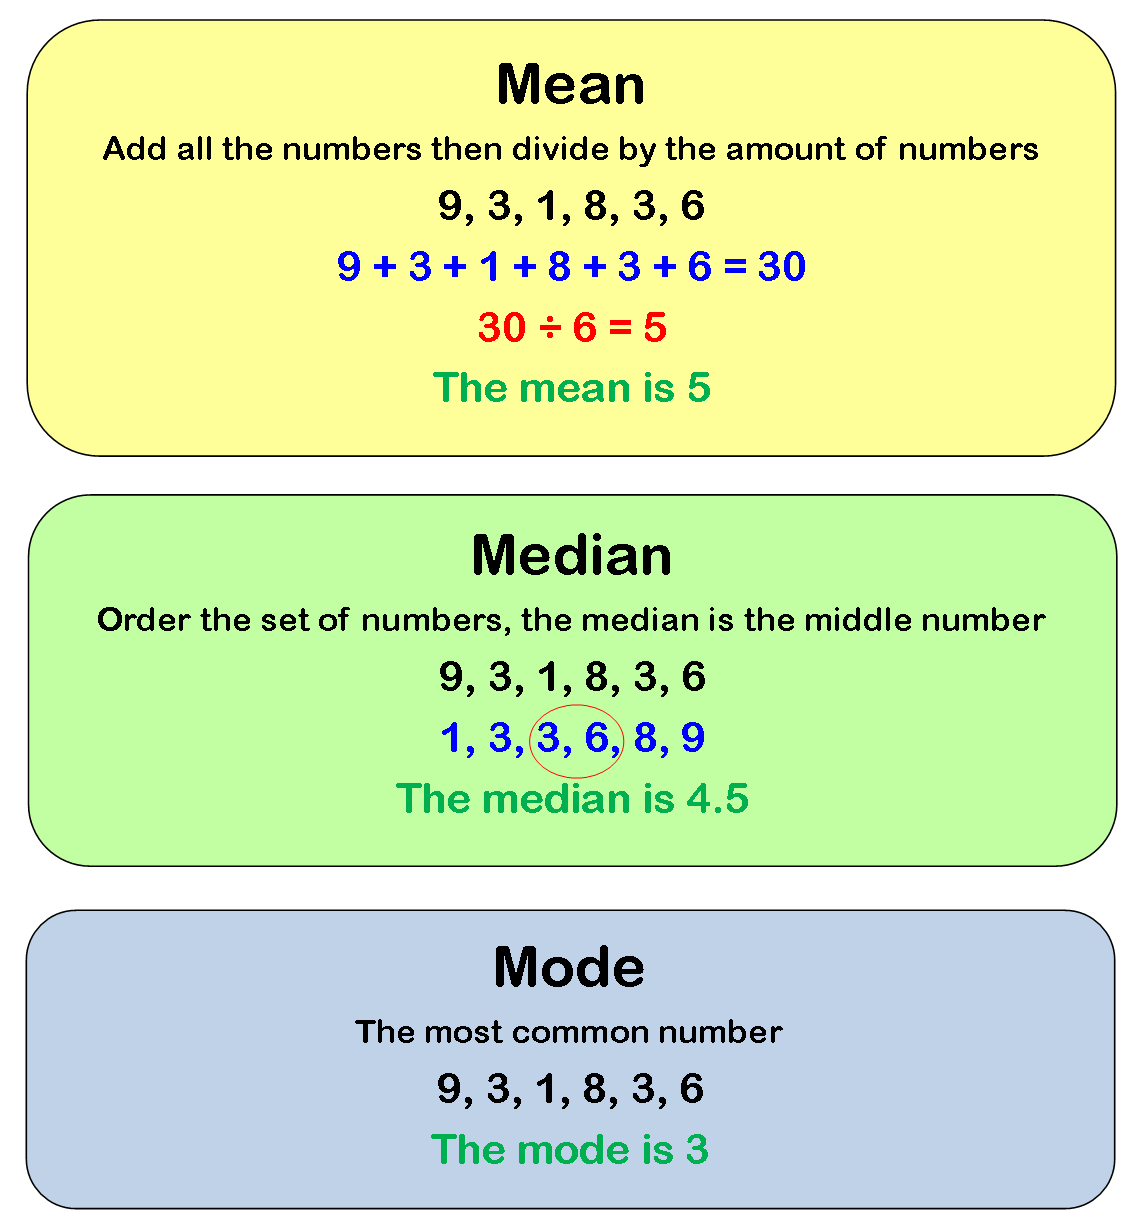 Maths Makes Your Life Add Up!: Mean, Median, Mode